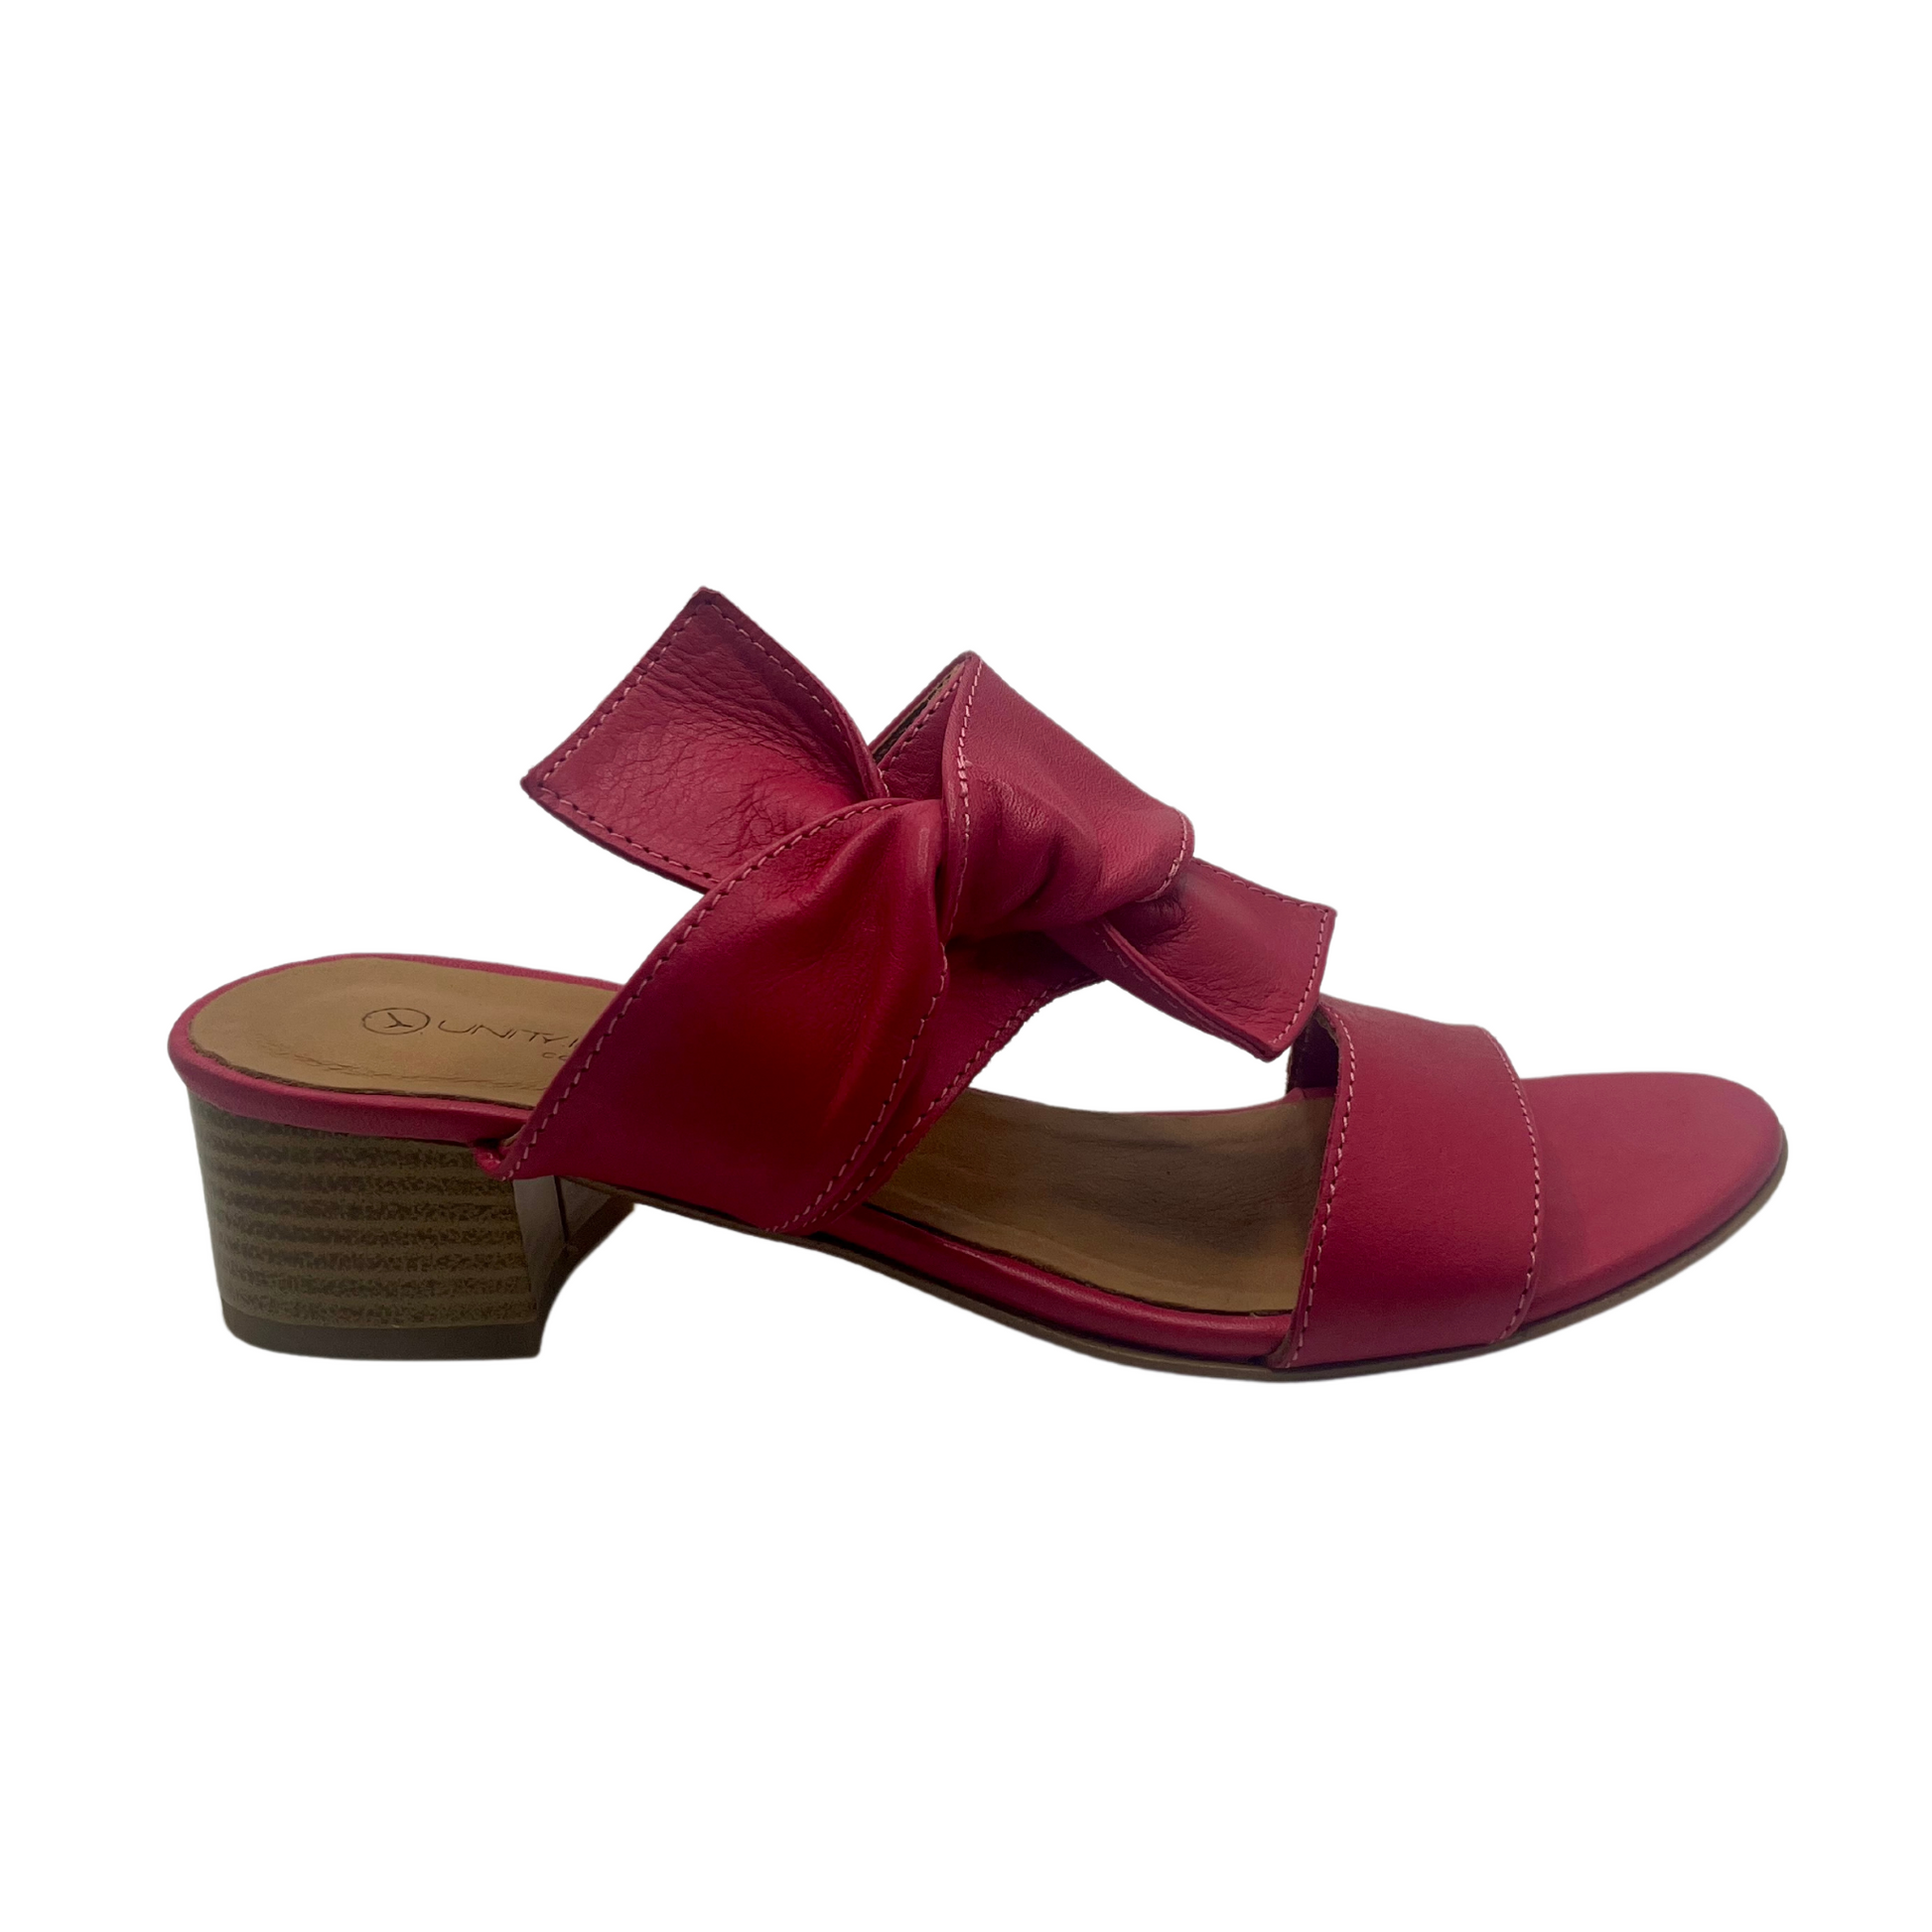 Right facing view of pink fuchsia leather sandals with a block heel, peep toe and knot detail on upper. 